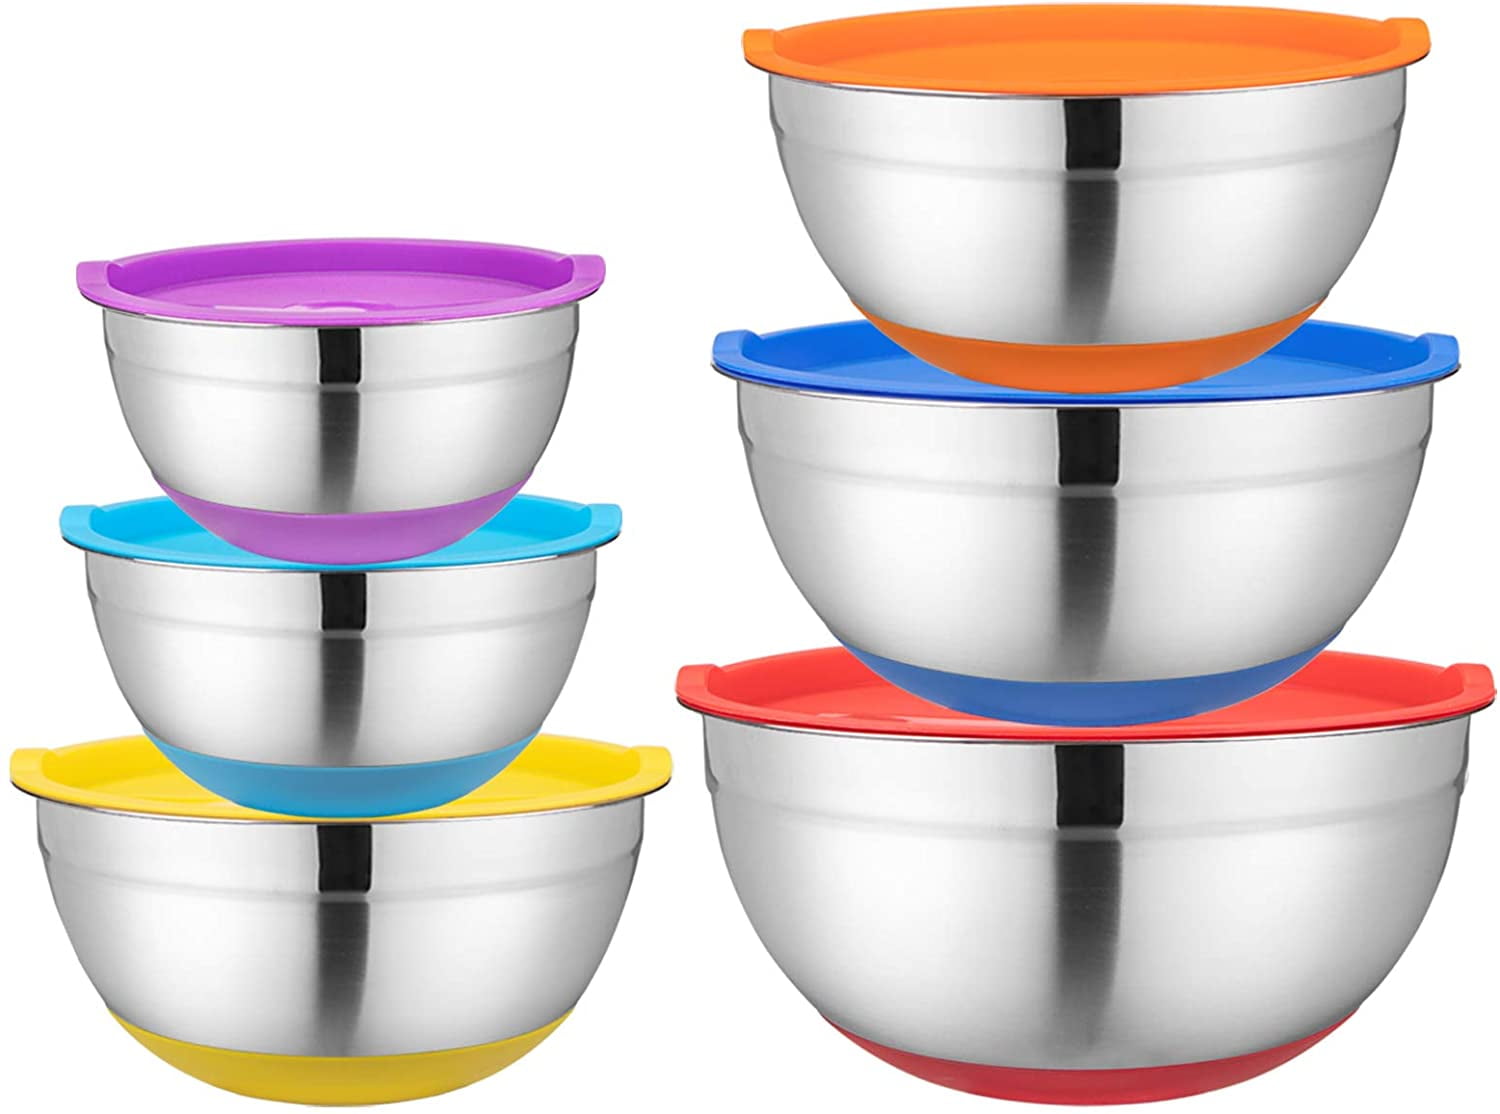 TINANA Mixing Bowls with Lids: Stainless Steel Mixing Bowls Set - 7PCS  Metal Nesting Mixing Bowls for Kitchen, Size 7, 4.5, 3, 2, 1.5, 1, 0.7 QT,  Great for Prep, Baking, Serving-Multi-Color 